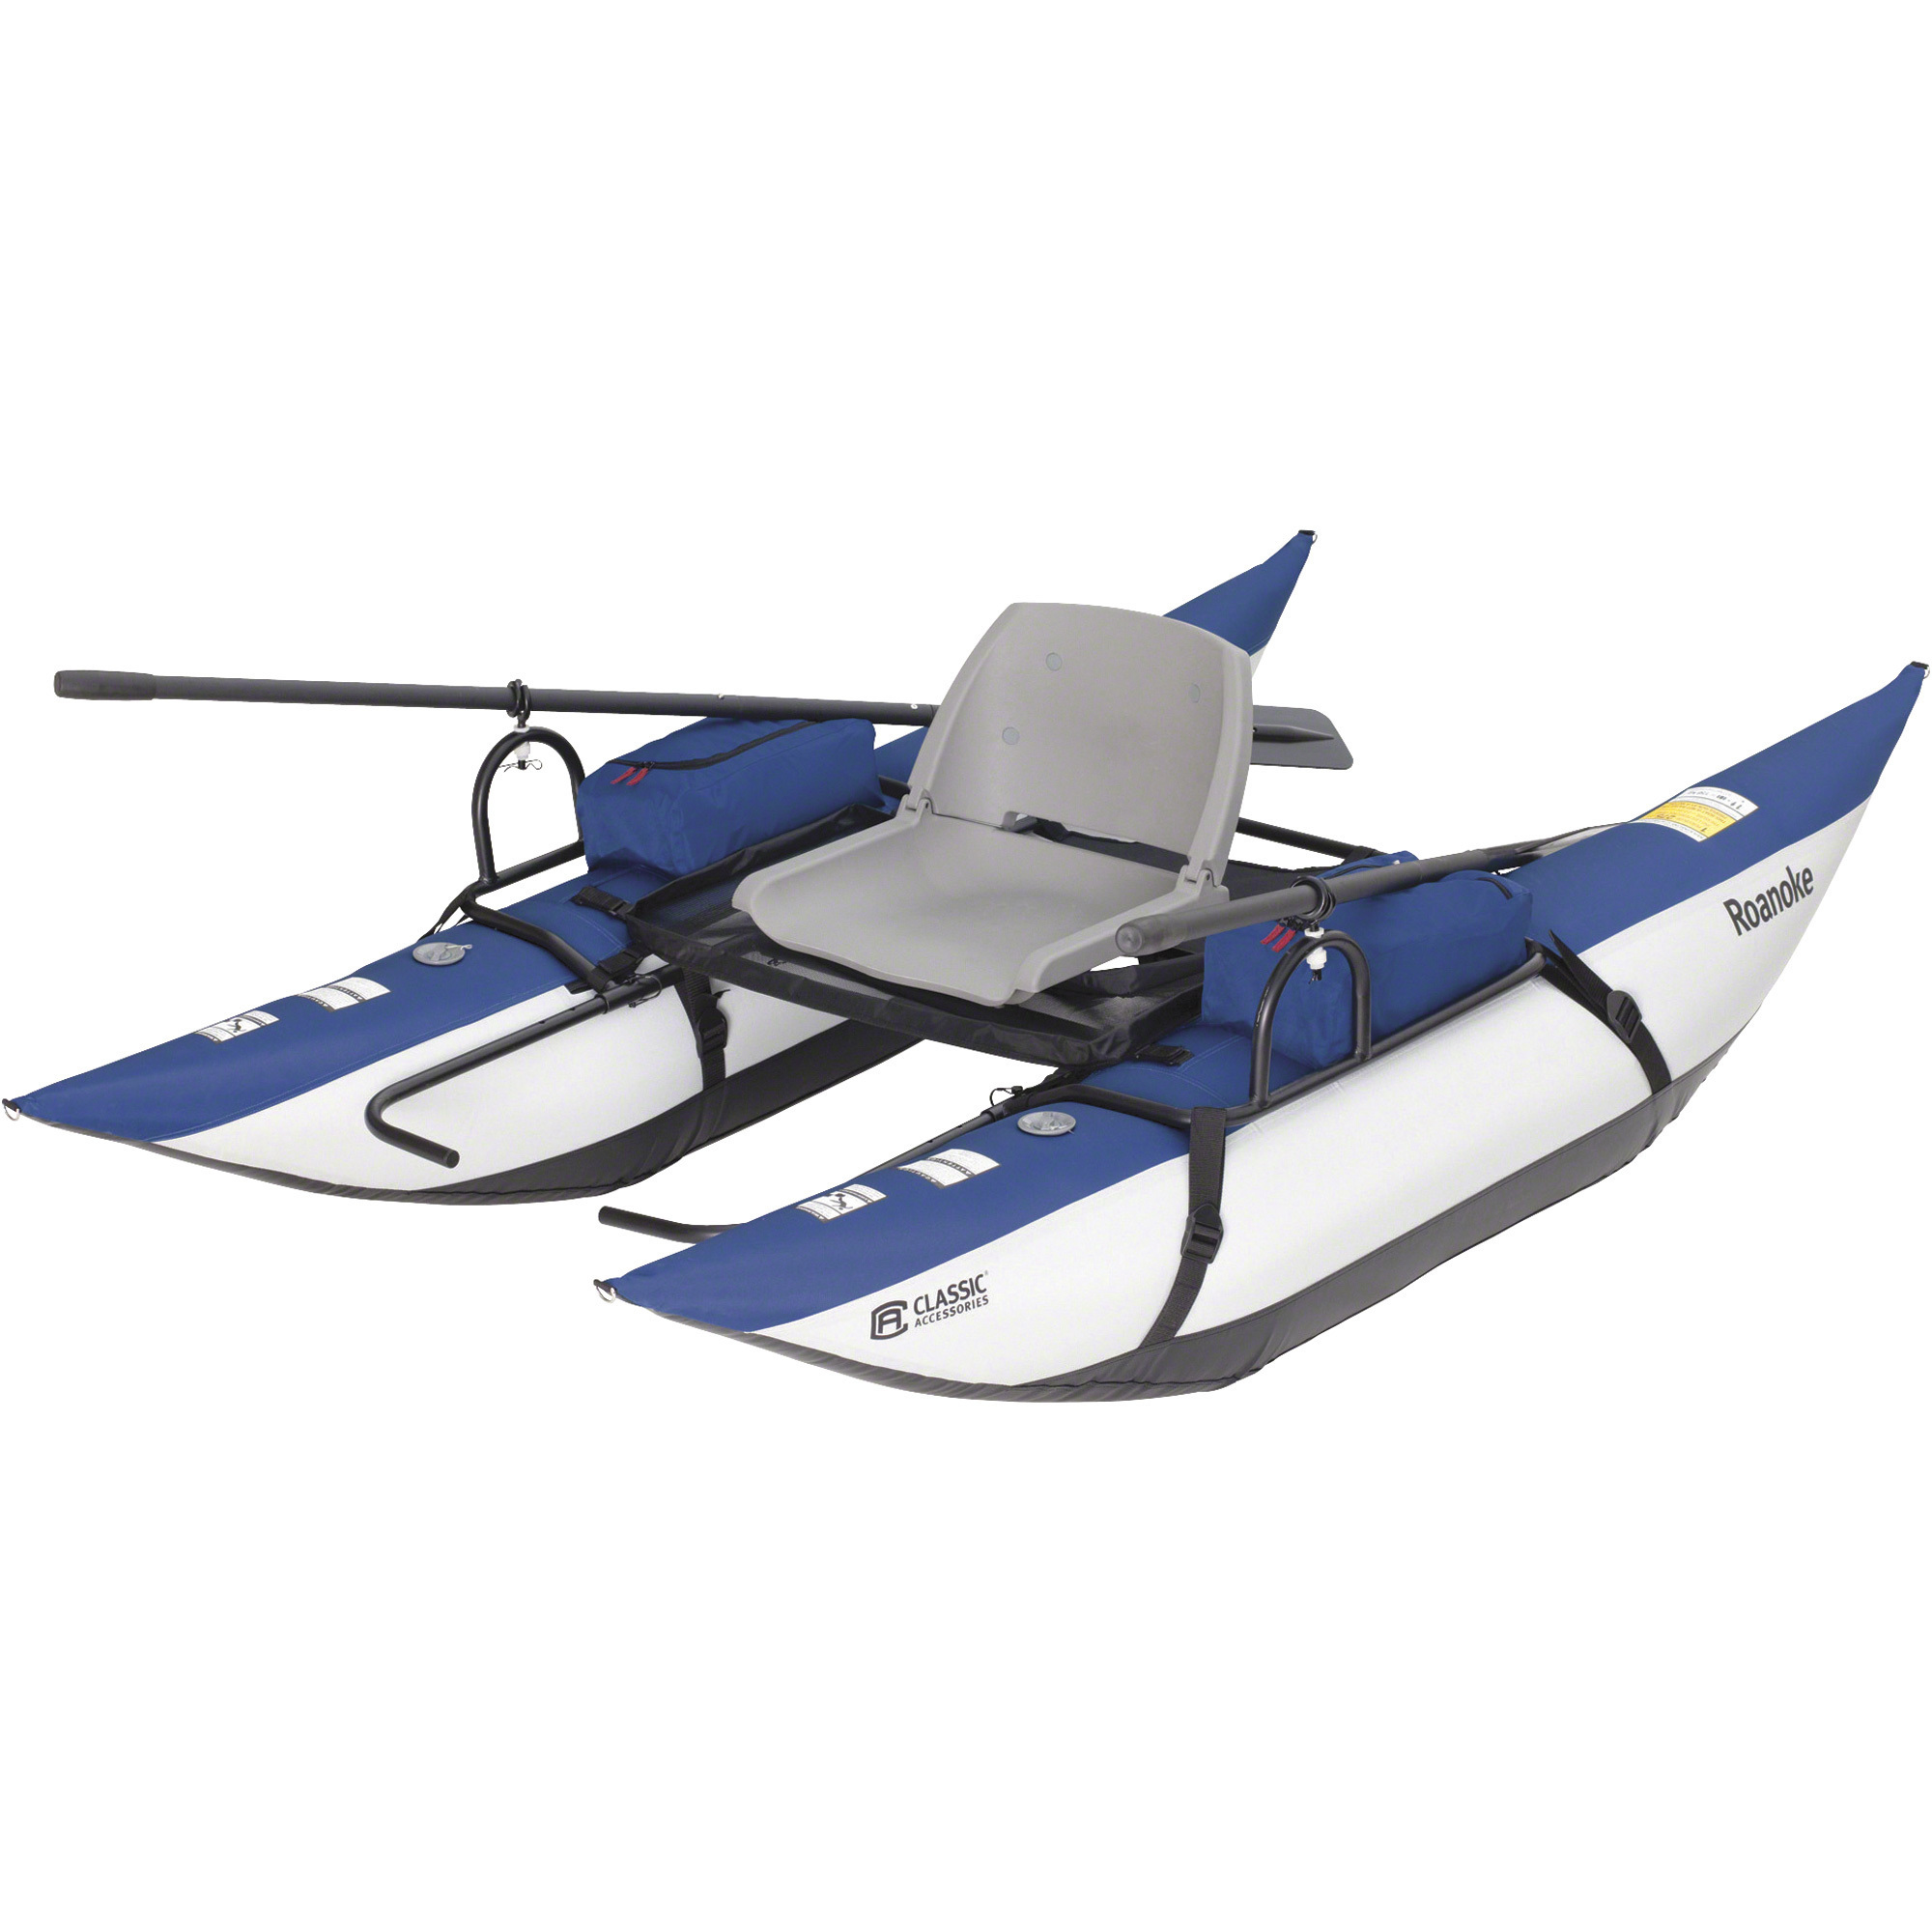 Classic Accessories Roanoke Inflatable Pontoon Boat, Blueberry and Silver,  96in.L x 55in.W x 29in.H, Model# 32-048-010601-00